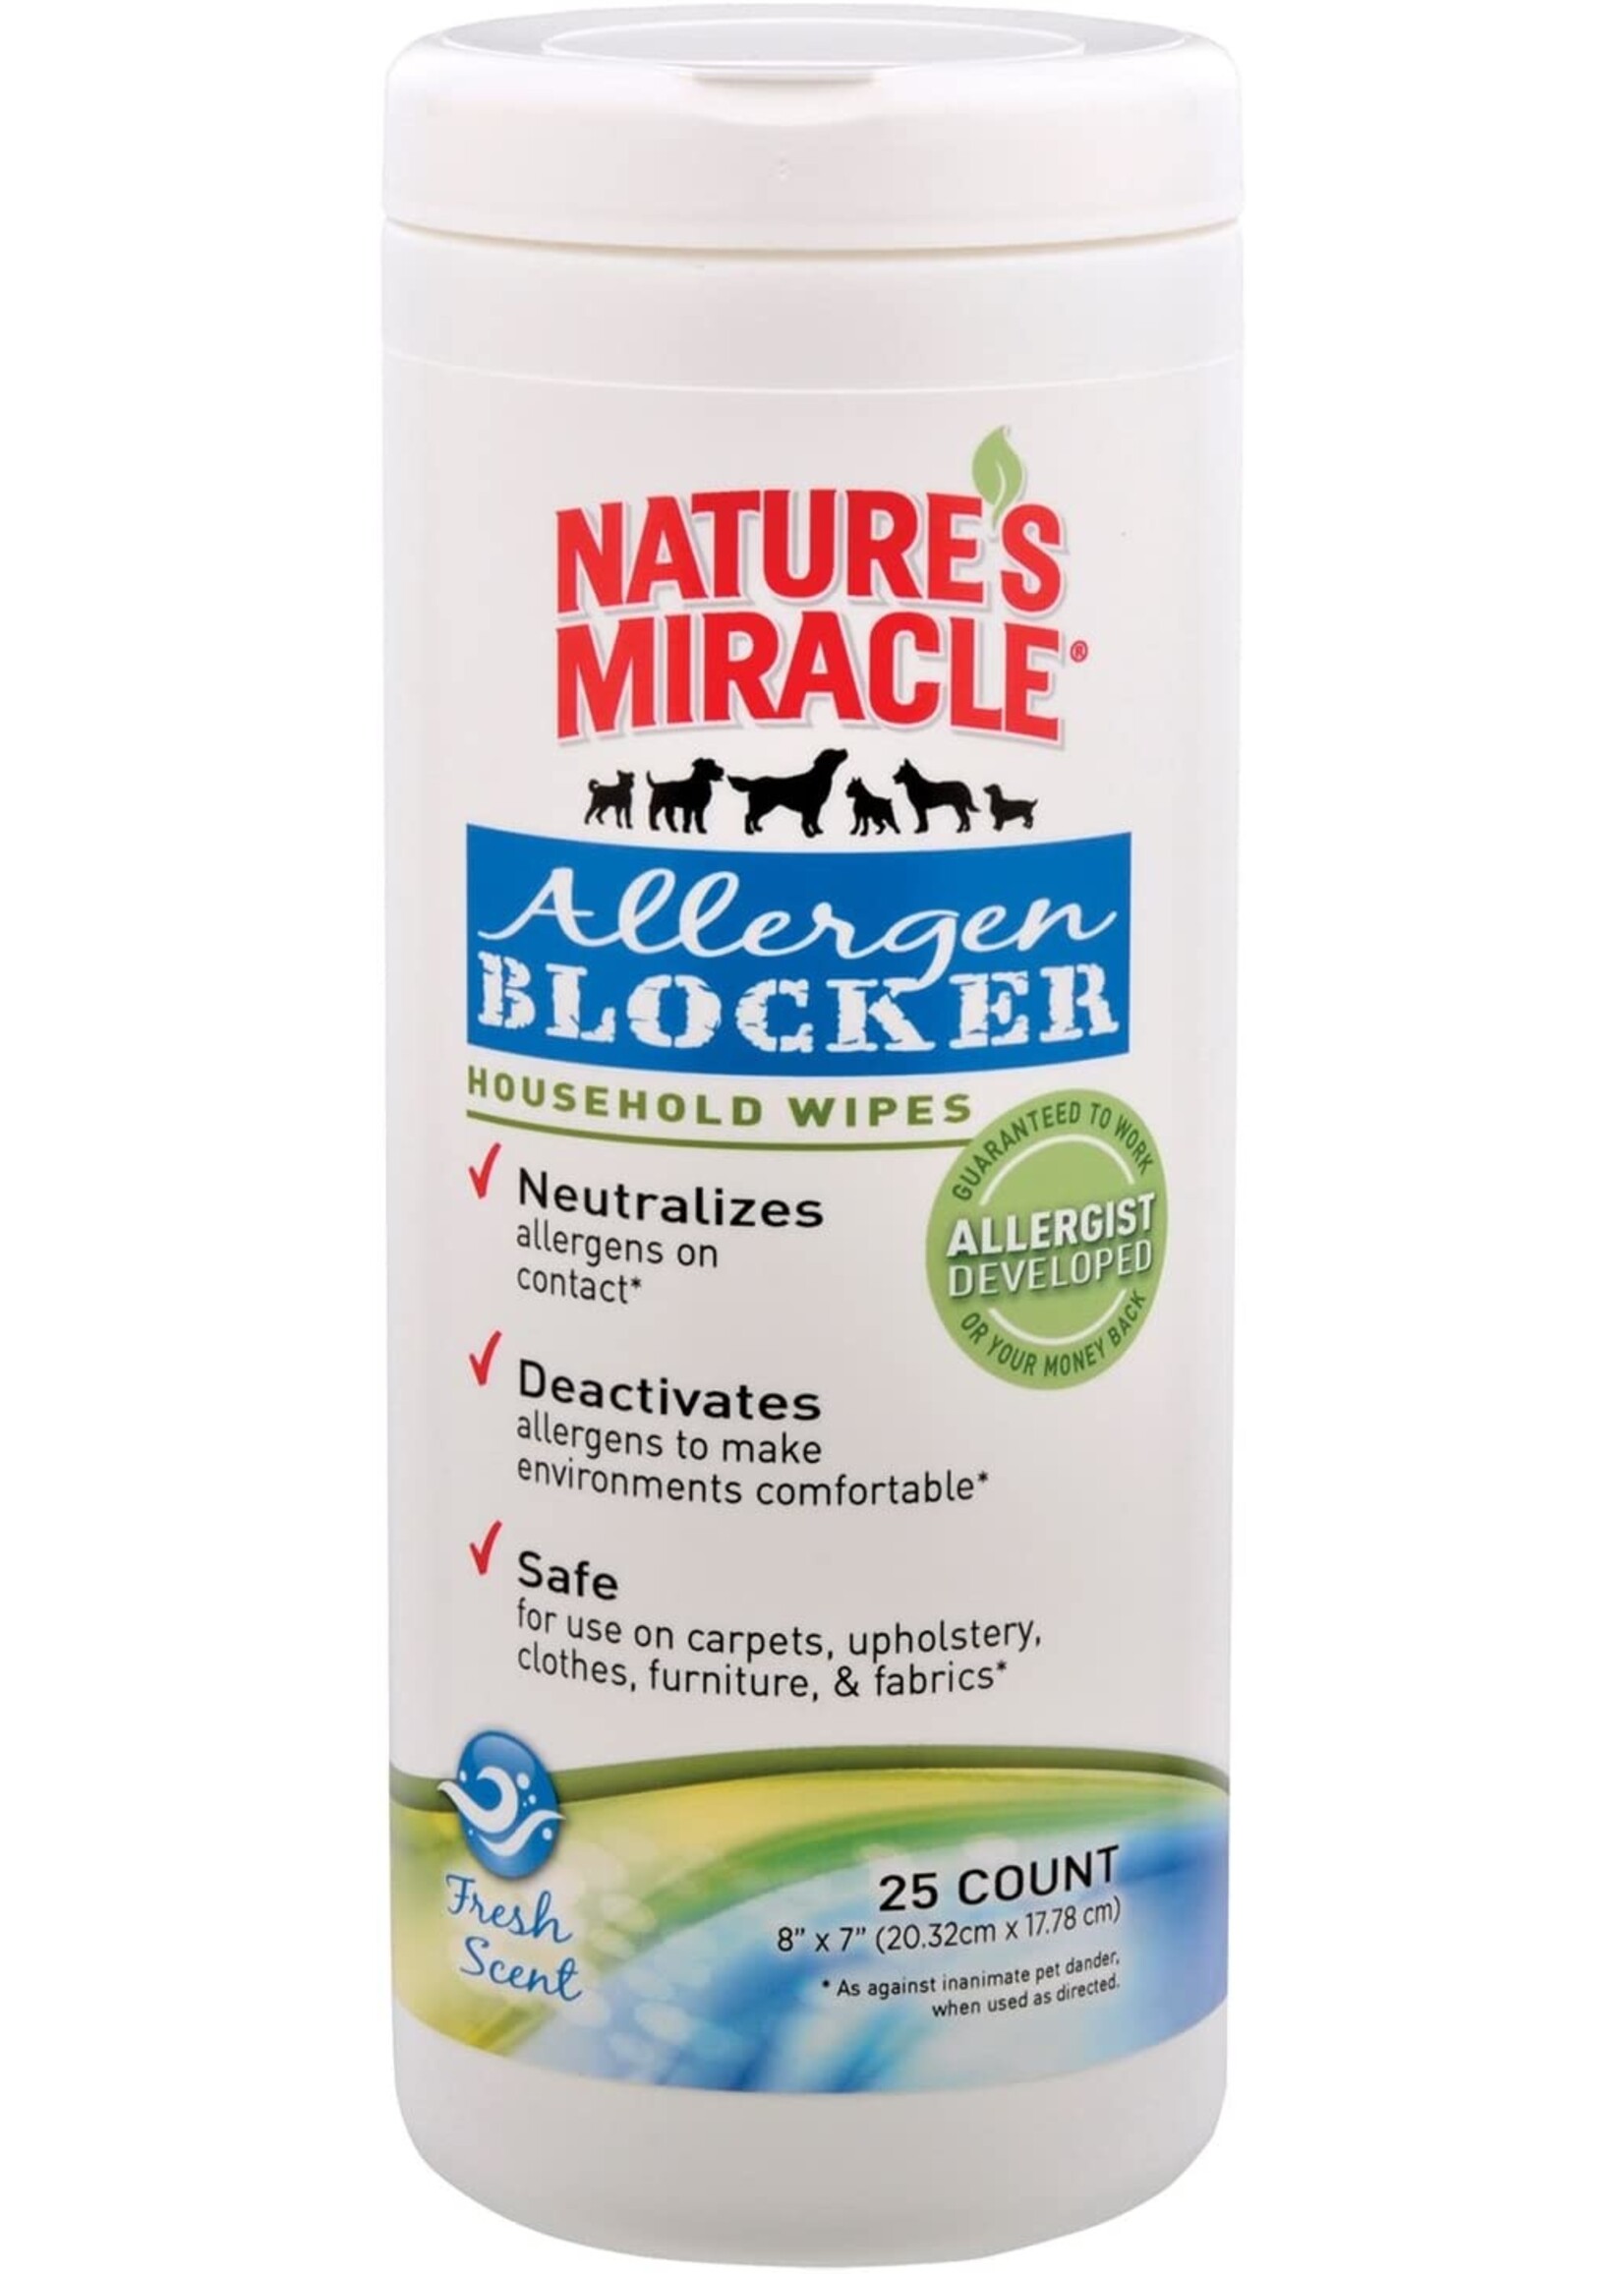 Nature's Miracle Nature's Miracle Allergen Blocker Household Wipes 25ct